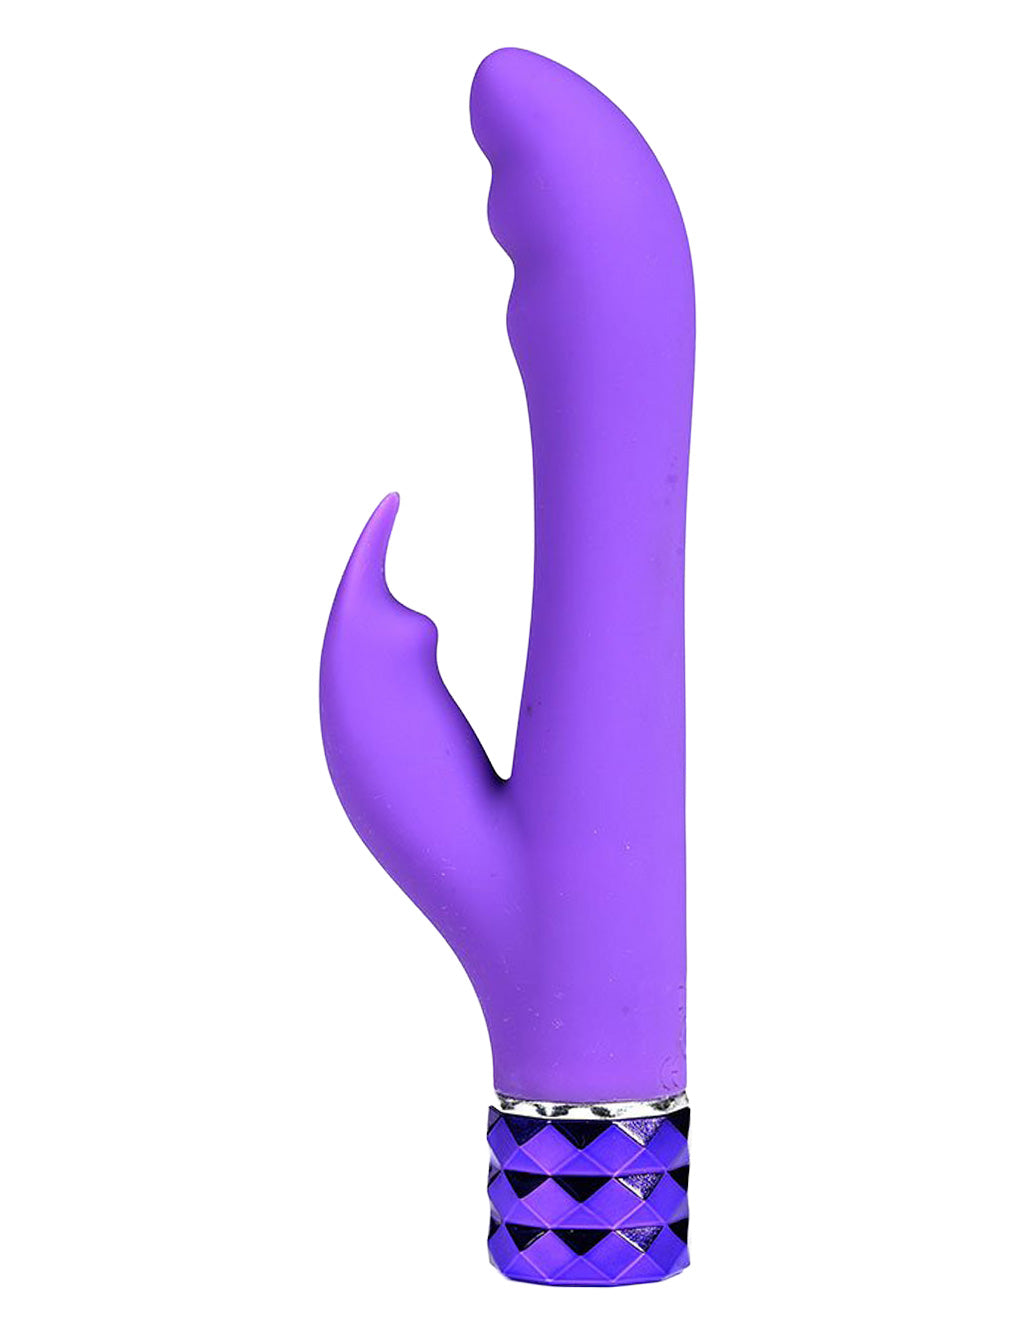 Hailey Crystal Gems Silicone 10-Function G-Spot Vibrator